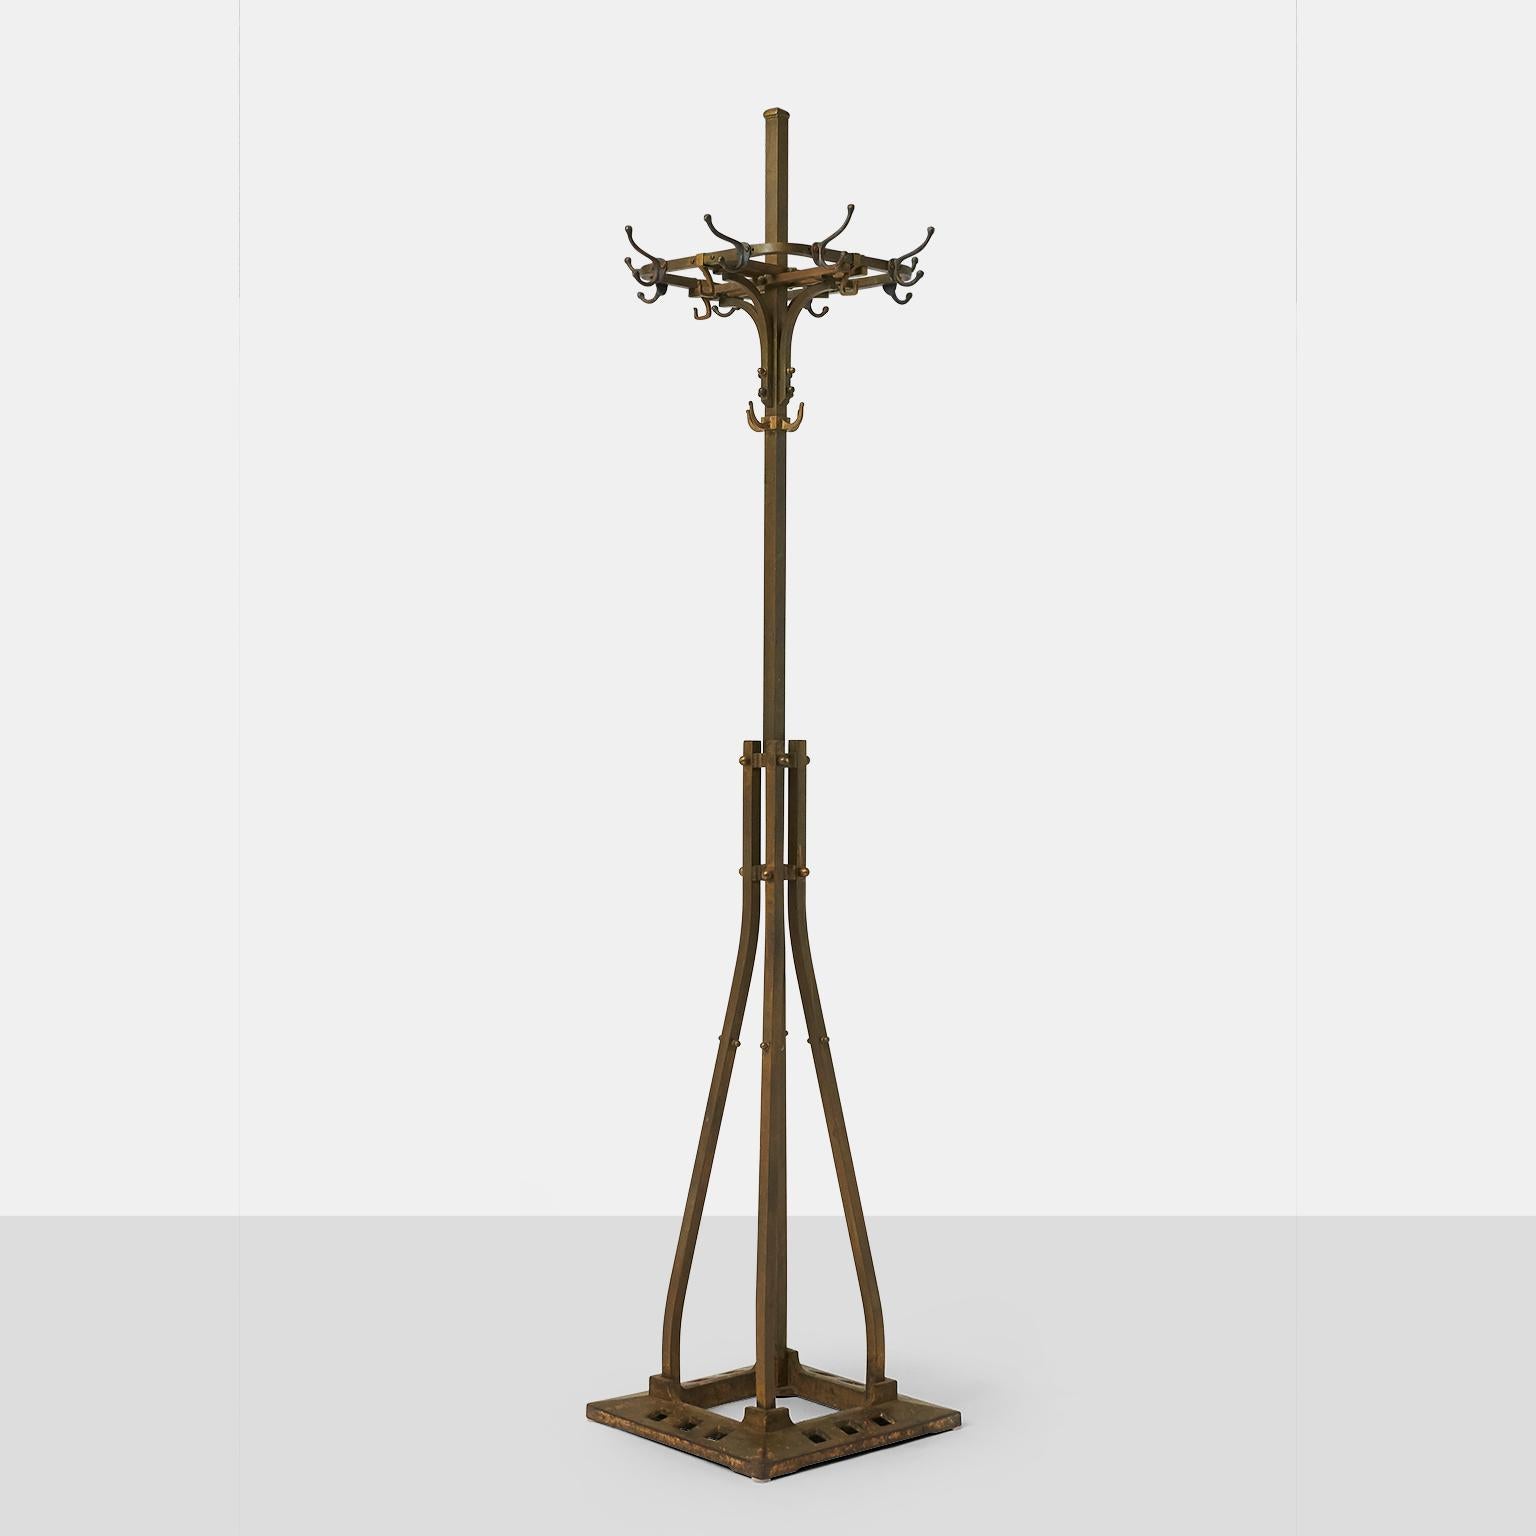 A Coat Rack by Adolf Loos designed for Café Capua. 
Unmarked. 
16 1/4 x 15 1/4 base